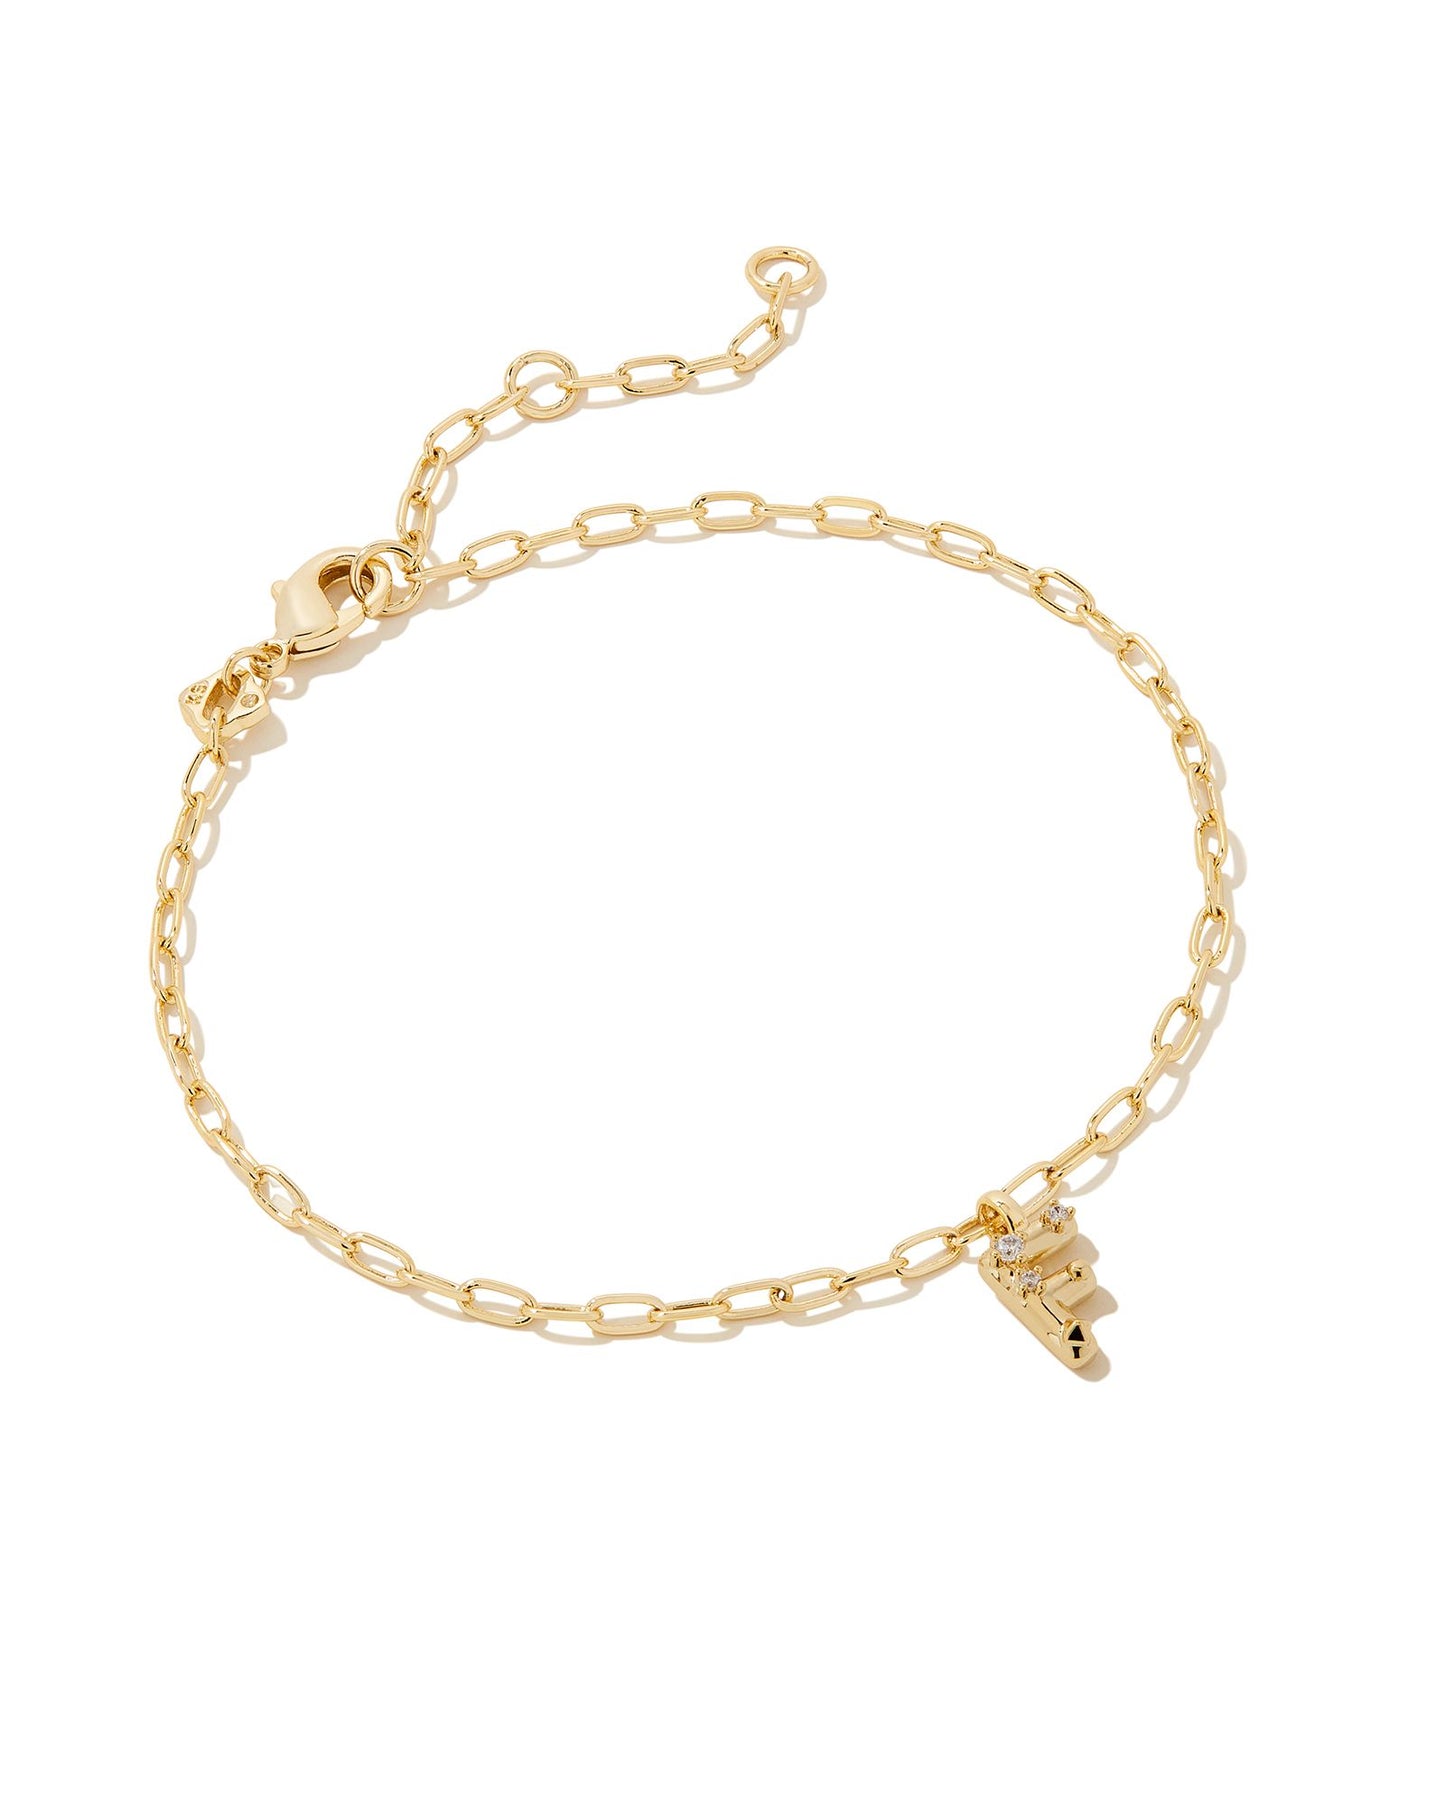  Add a personal touch to your wrist stack with the Crystal Delicate Chain Bracelet in White Crystal, our first Fashion Jewelry initial bracelet. Featuring a dainty chain and letter charm with a hint of sparkle, this bracelet is the perfect way to celebrate the ones you love—including yourself!  Dimensions- 6.5' CHAIN WITH 1.5' EXTENDER, 0.45'L X 0.26"W PENDANT Metal- 14K Gold plated over brass Closure- Lobster Clasp Material-  White CZ Letter F